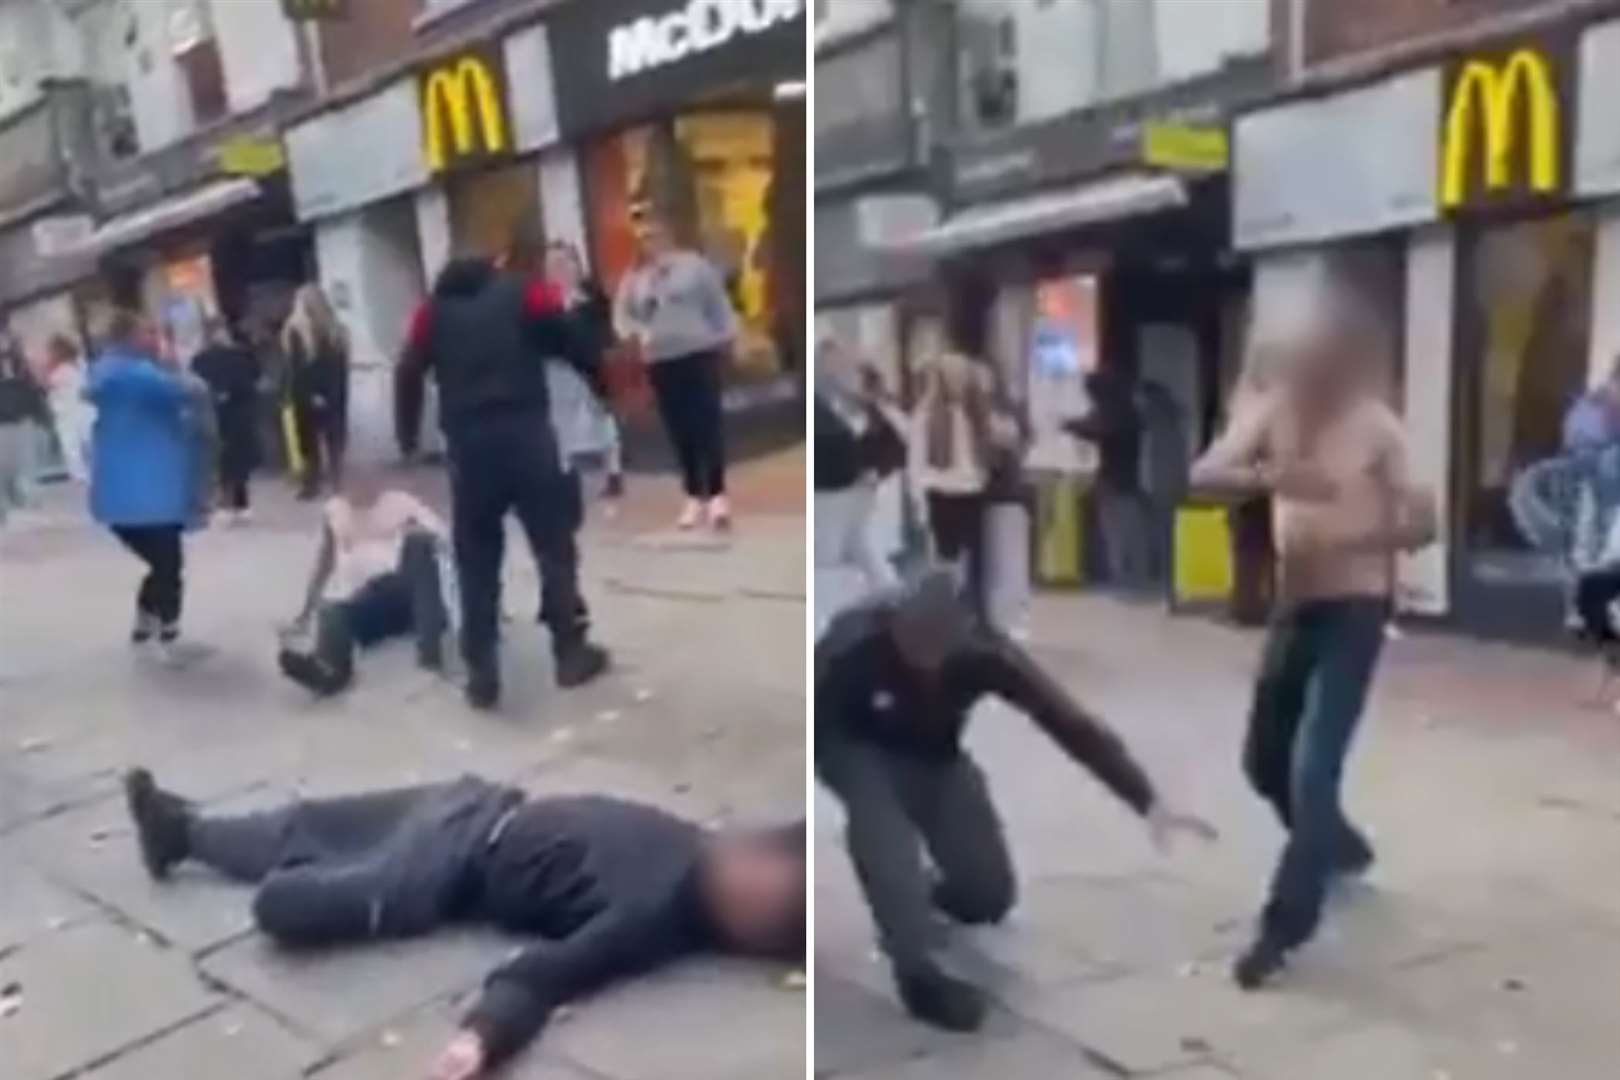 A number of people ended up getting involved in the fight